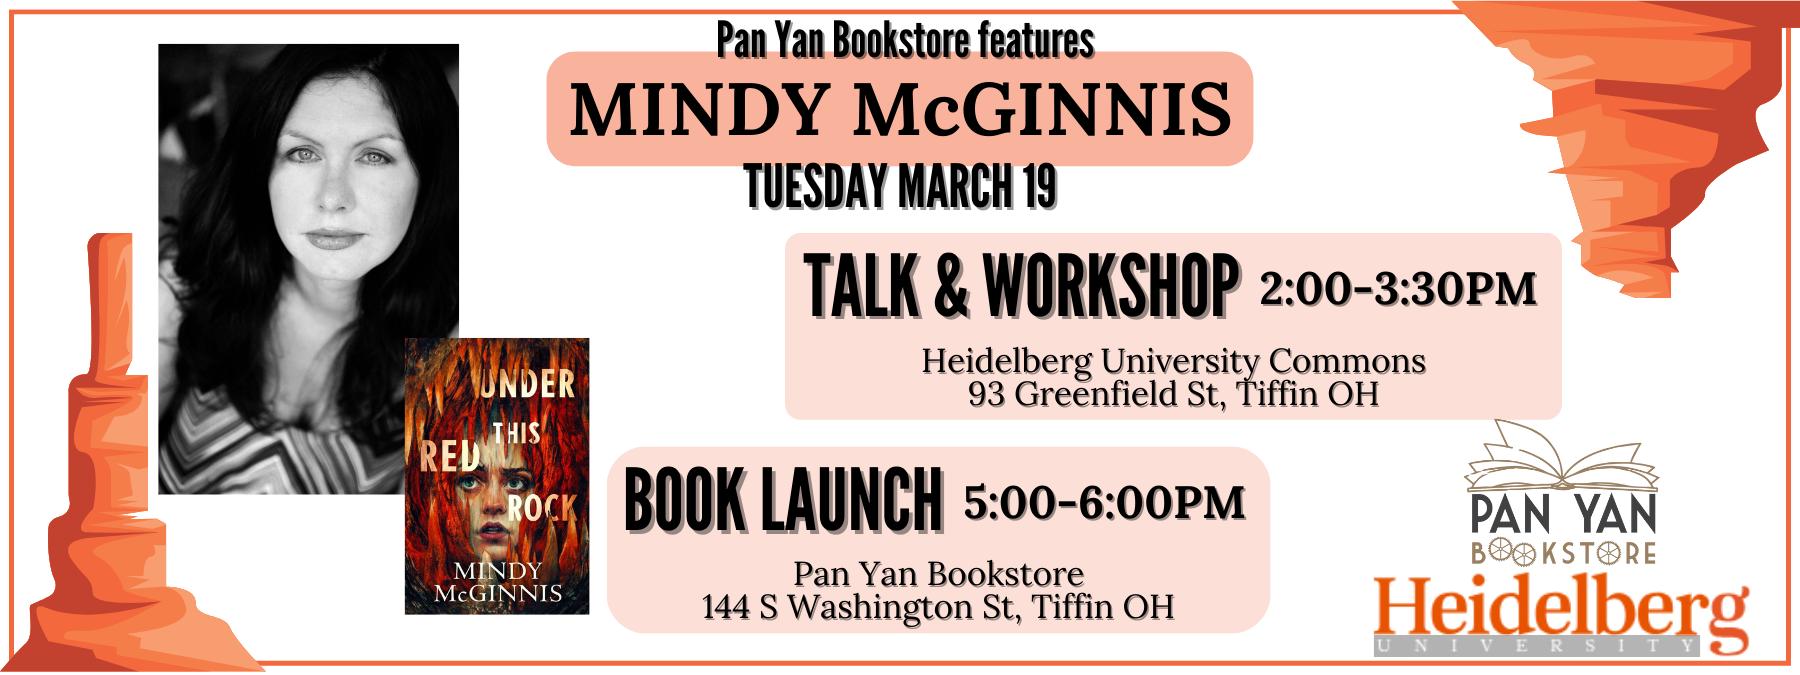 Book Launch with Mindy McGinnis - Under This Red Rock